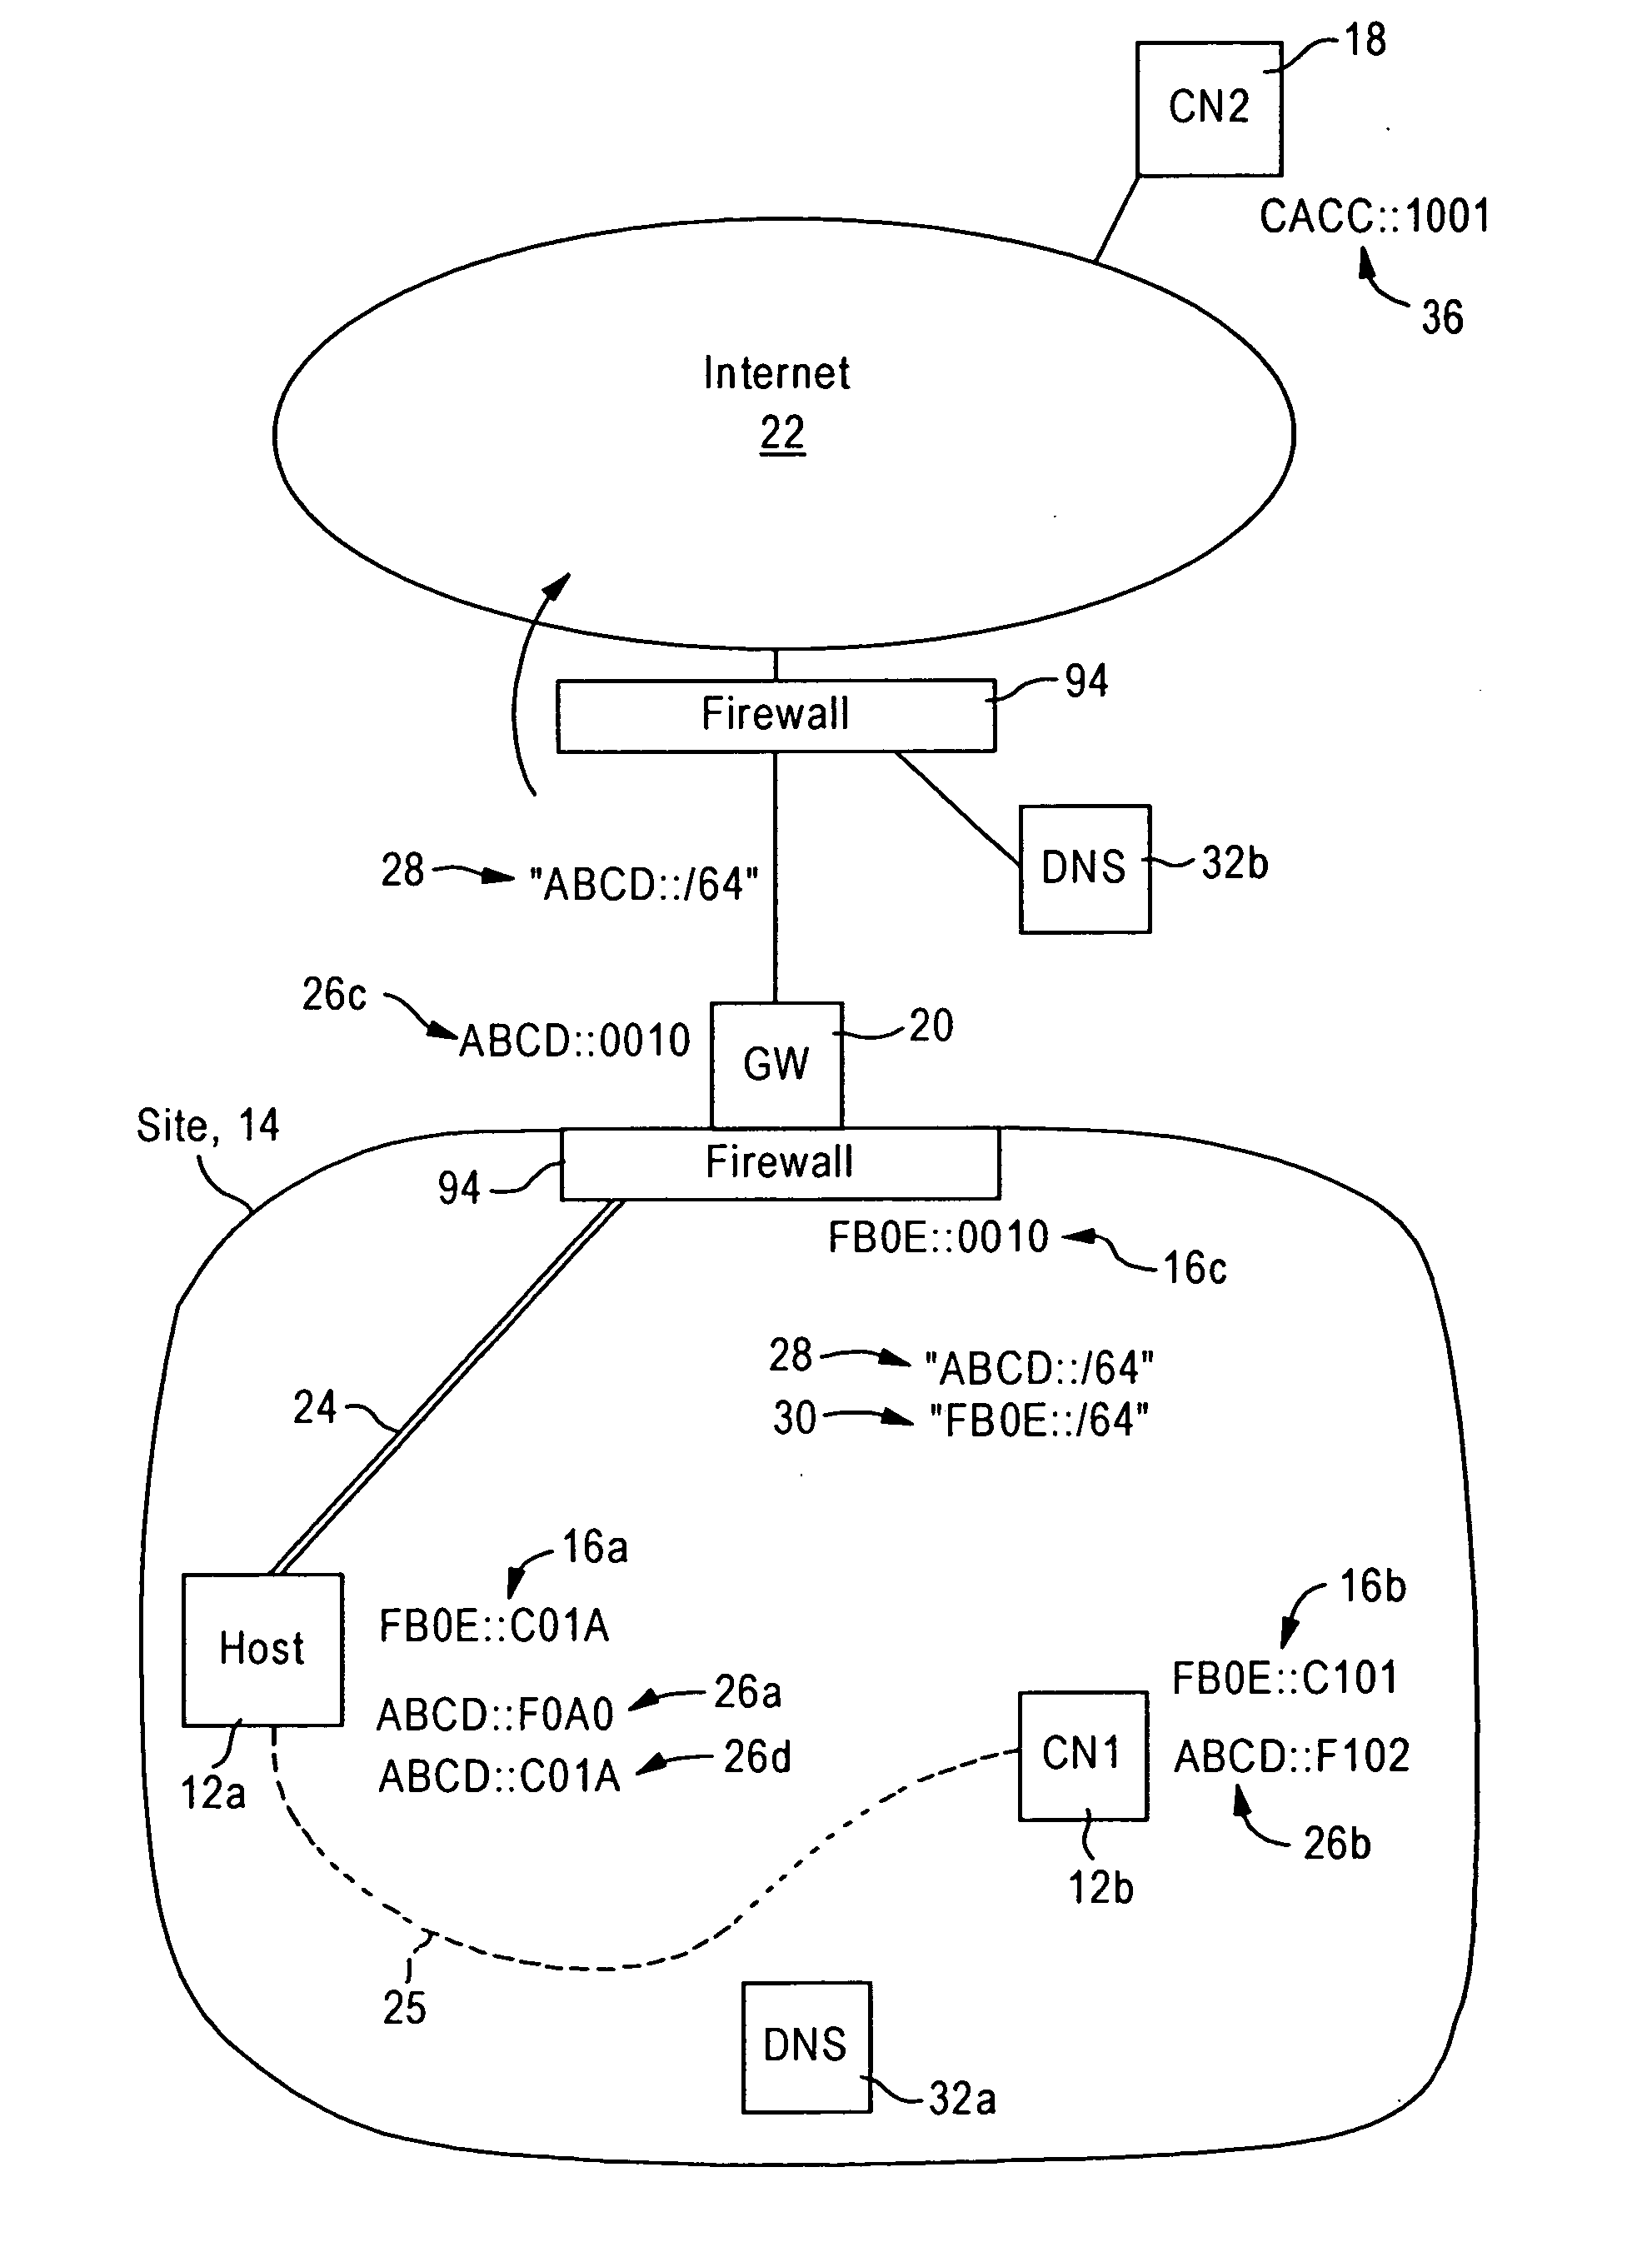 Maintaining secrecy of assigned unique local addresses for IPv6 nodes within a prescribed site during access of a wide area network